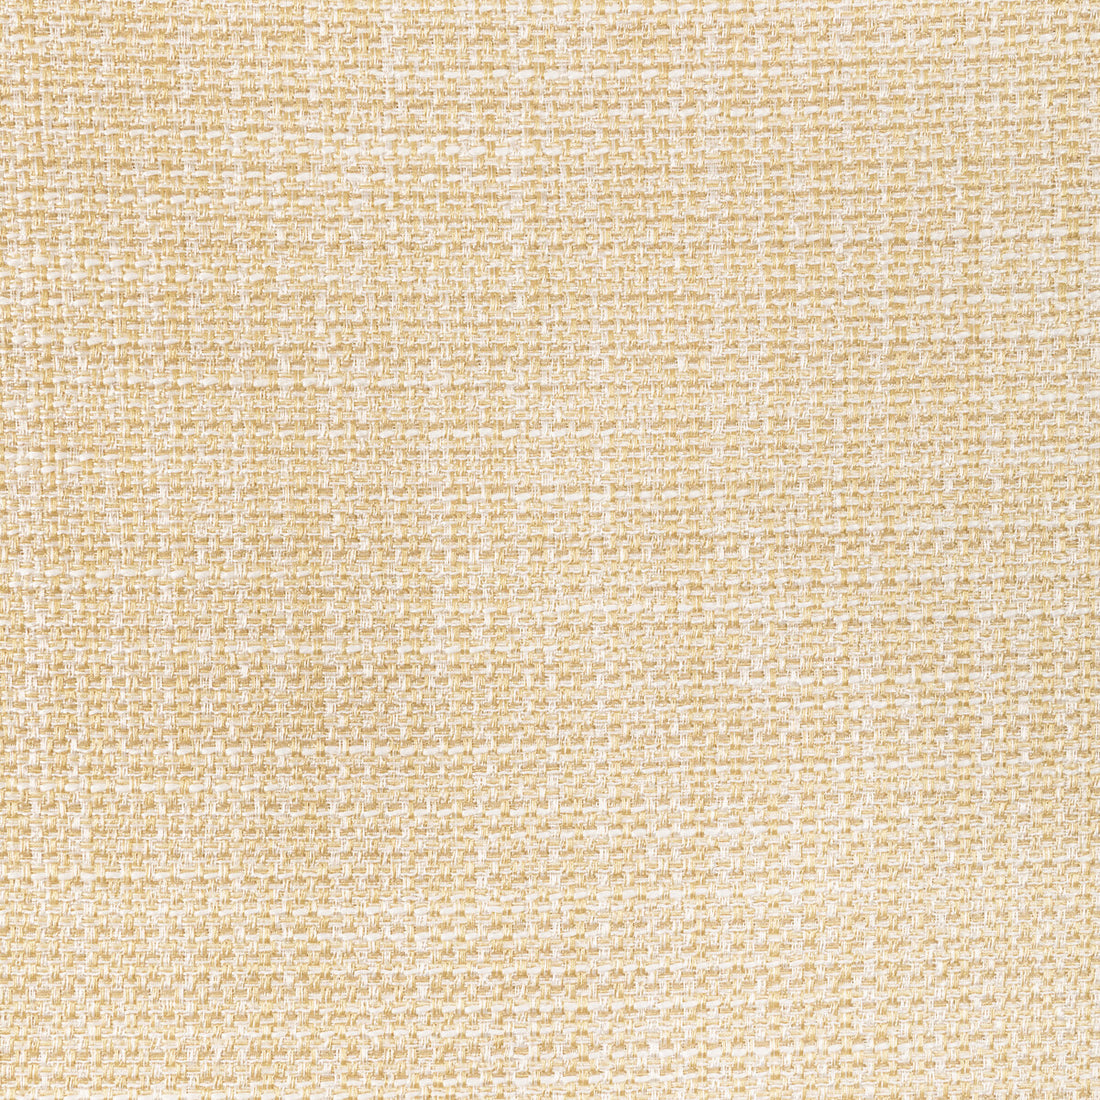 Luma Texture fabric in desert color - pattern 4947.1614.0 - by Kravet Contract in the Fr Window Luma Texture collection